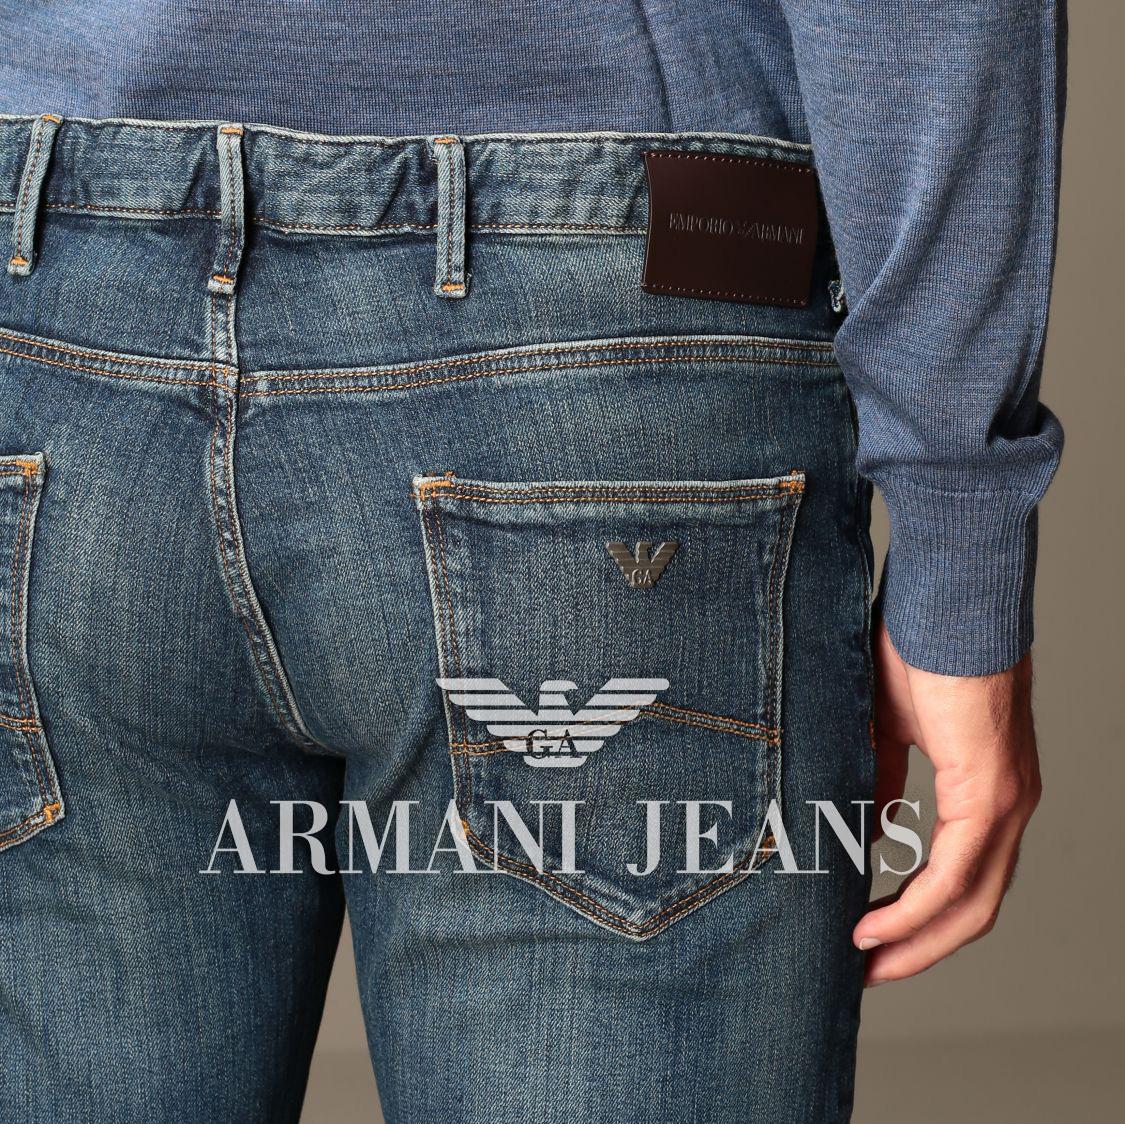 dug Fortære Trivial Armani Jeans Size Chart for Men, Women and kids - size conversion & tips